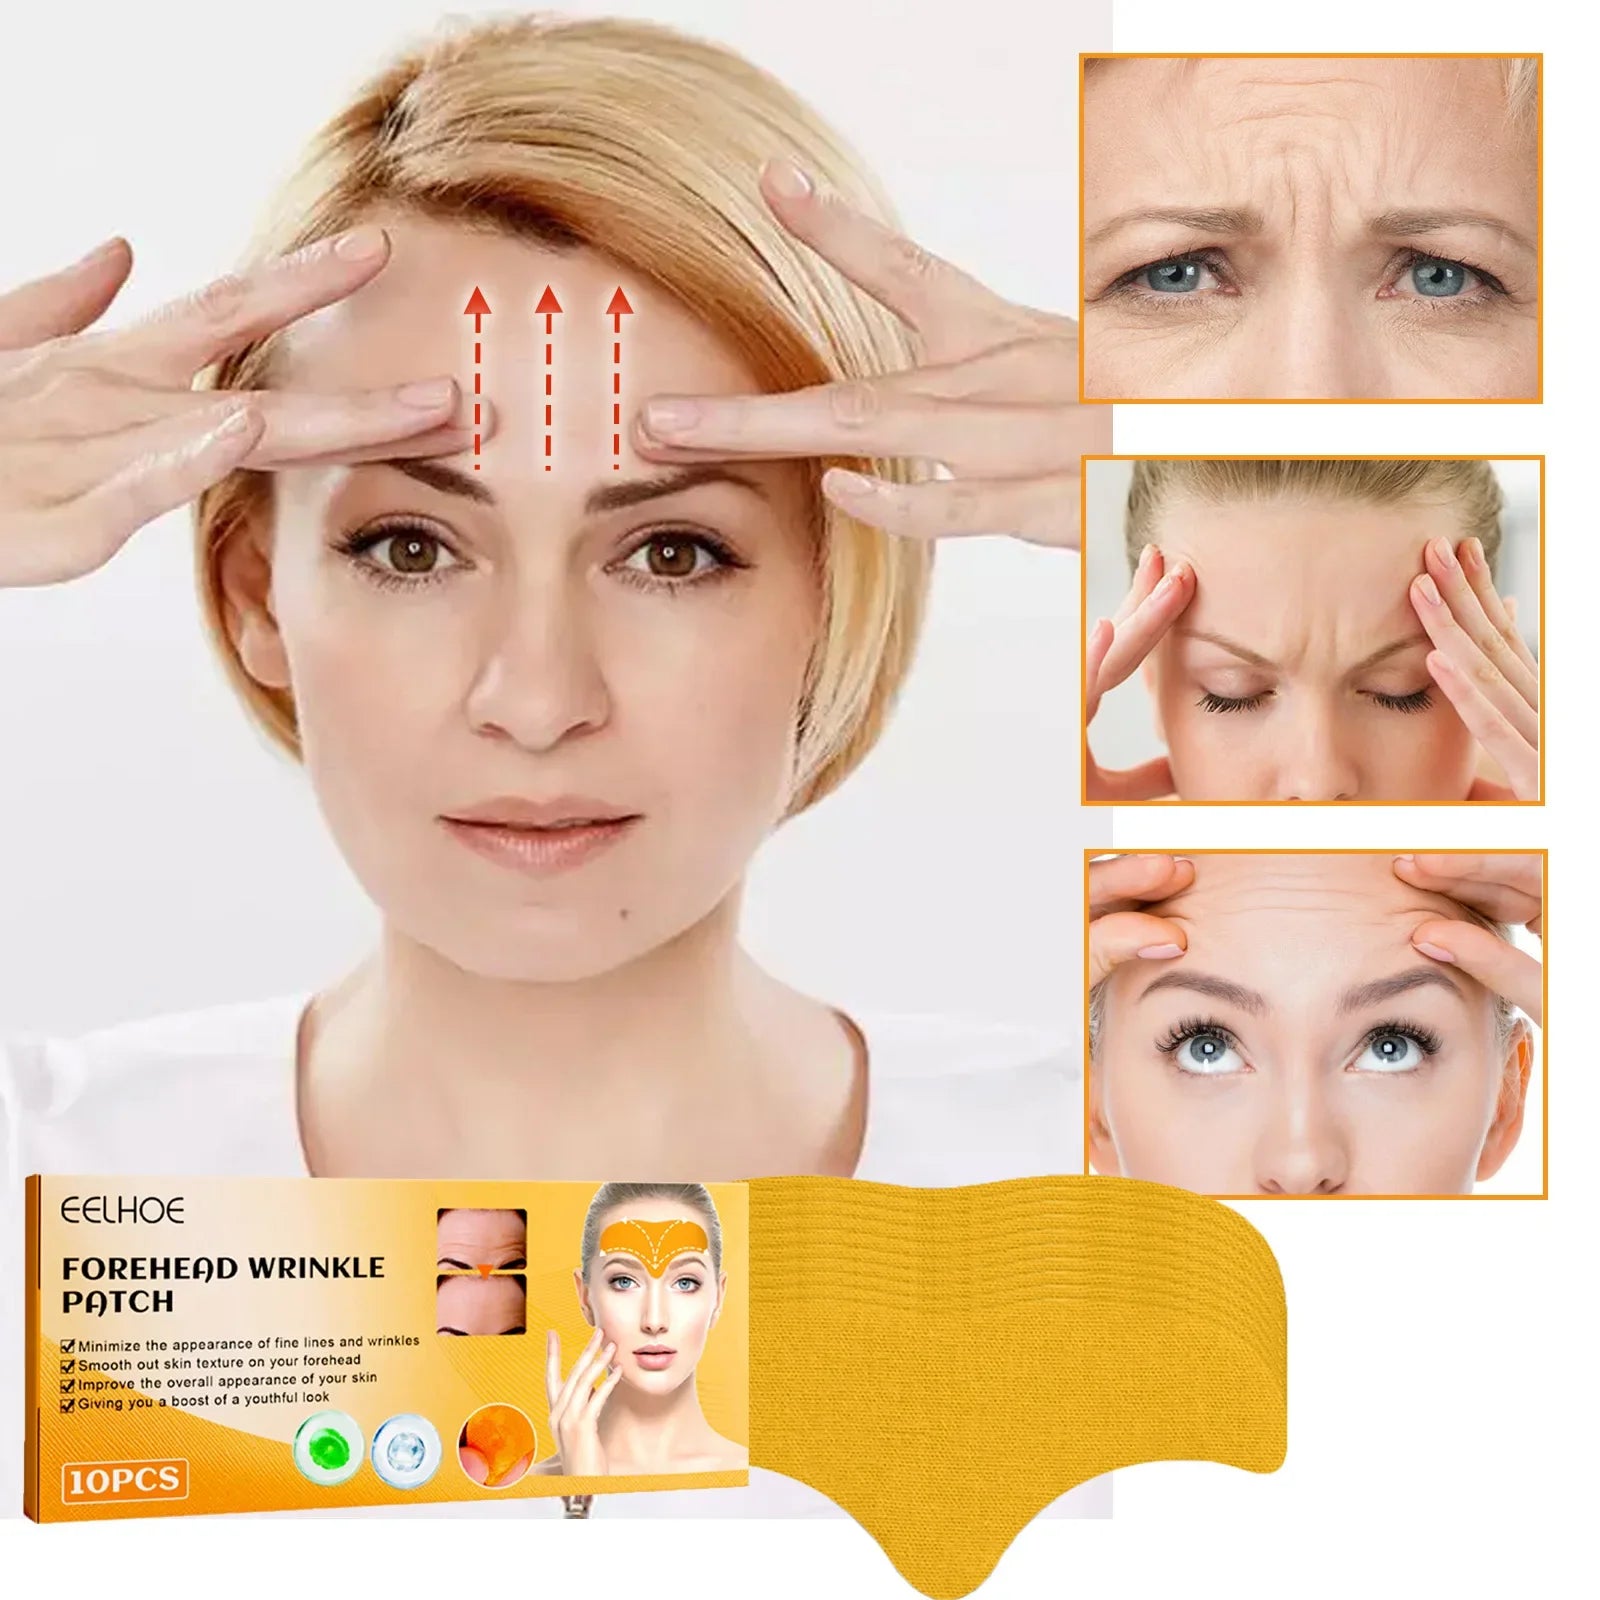 Forehead Wrinkle Patch Lightening Forehead Wrinkle Anti-wrinkle Firming Mask Frown Treatment Stickers Anti-aging Face Skin Care